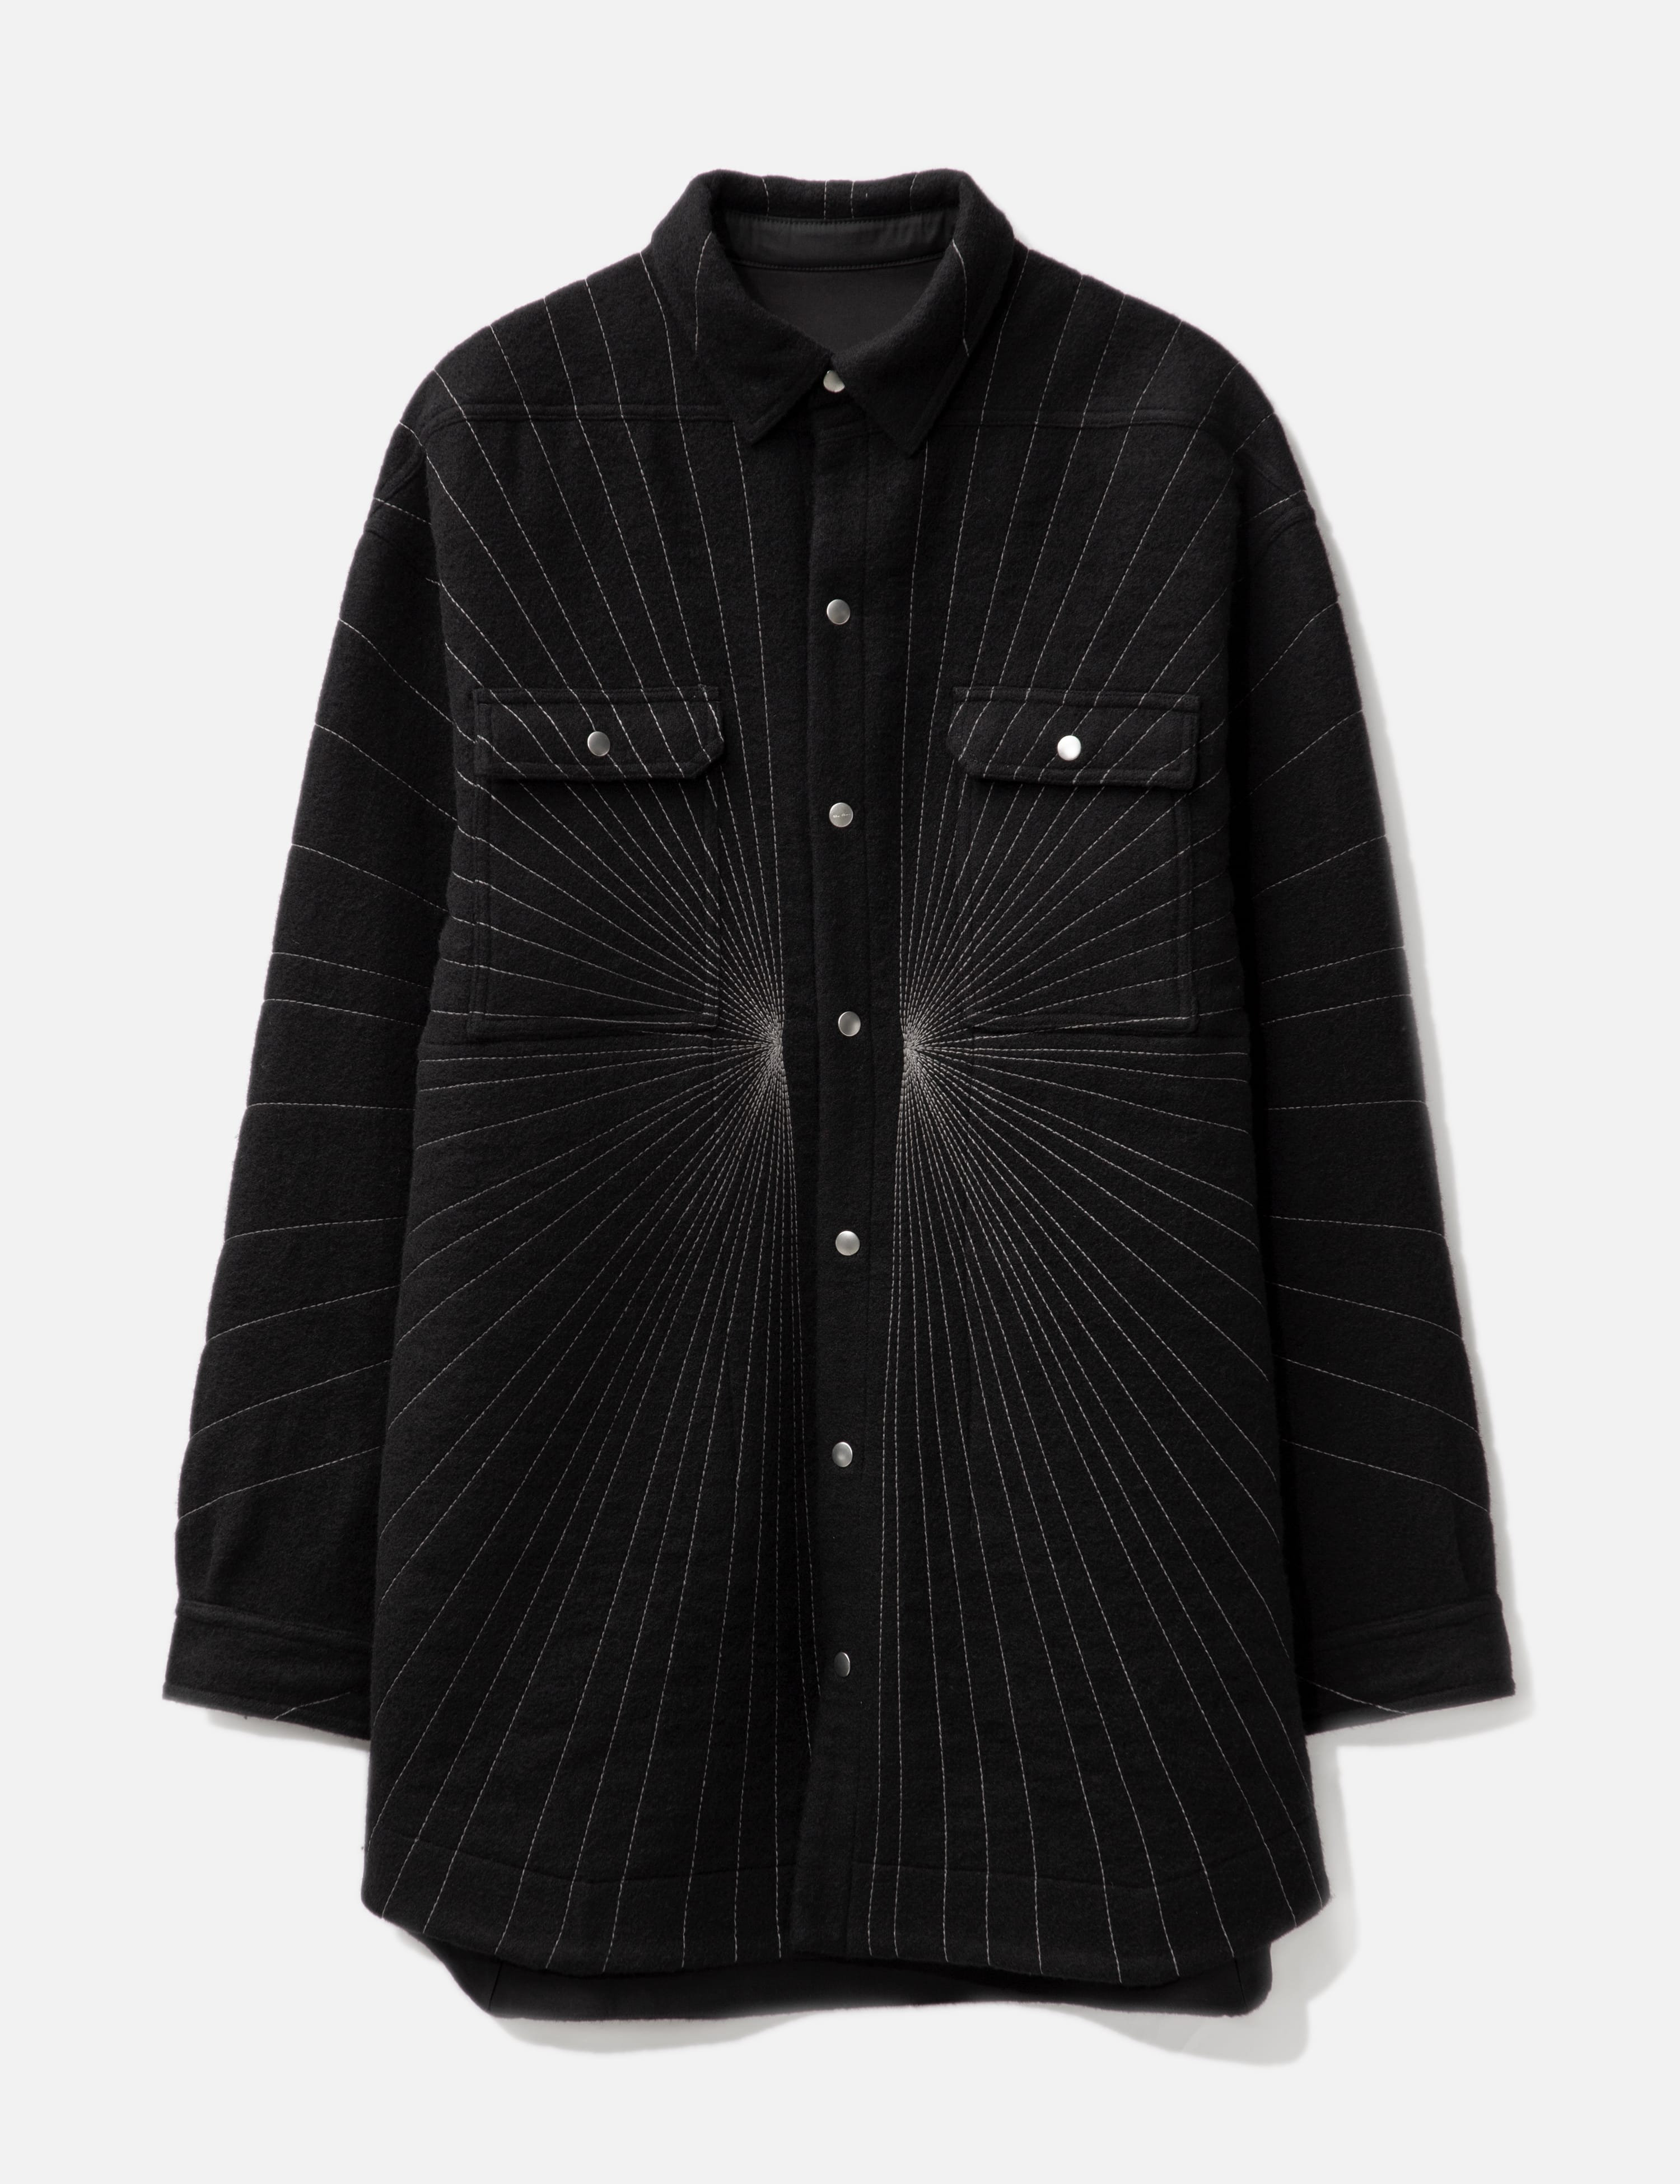 Rick Owens   OVERSIZED OUTERSHIRT   HBX   Globally Curated Fashion